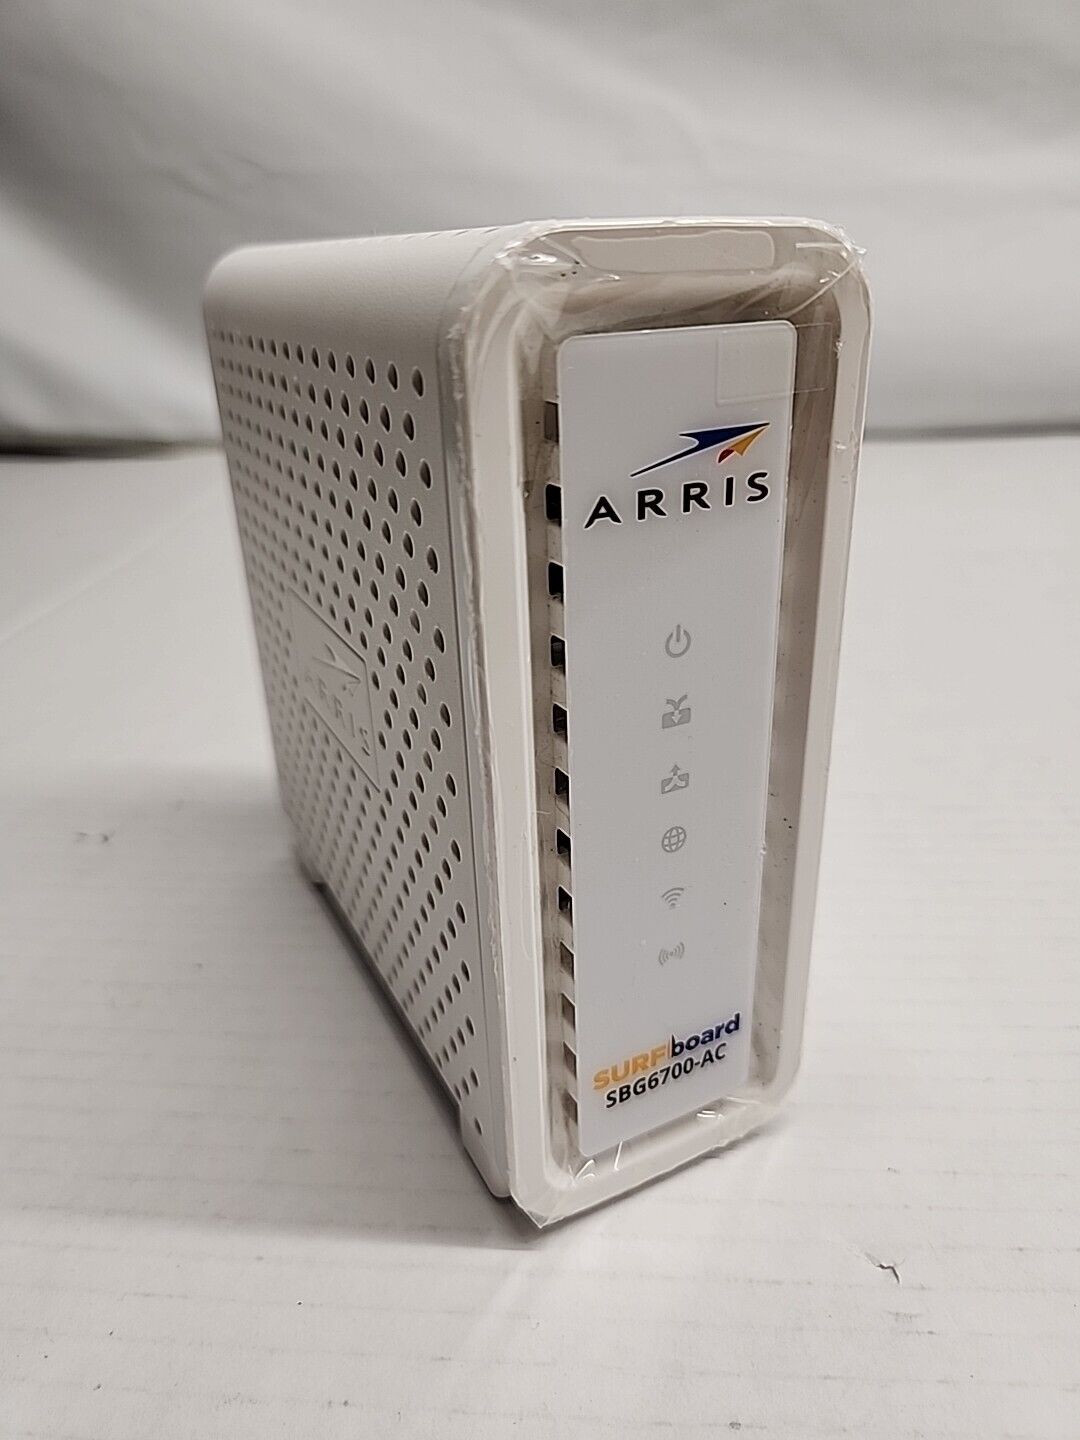 Arris Surfboard SBG6700AC DOCSIS 3.0 Cable Modem No Power Cord